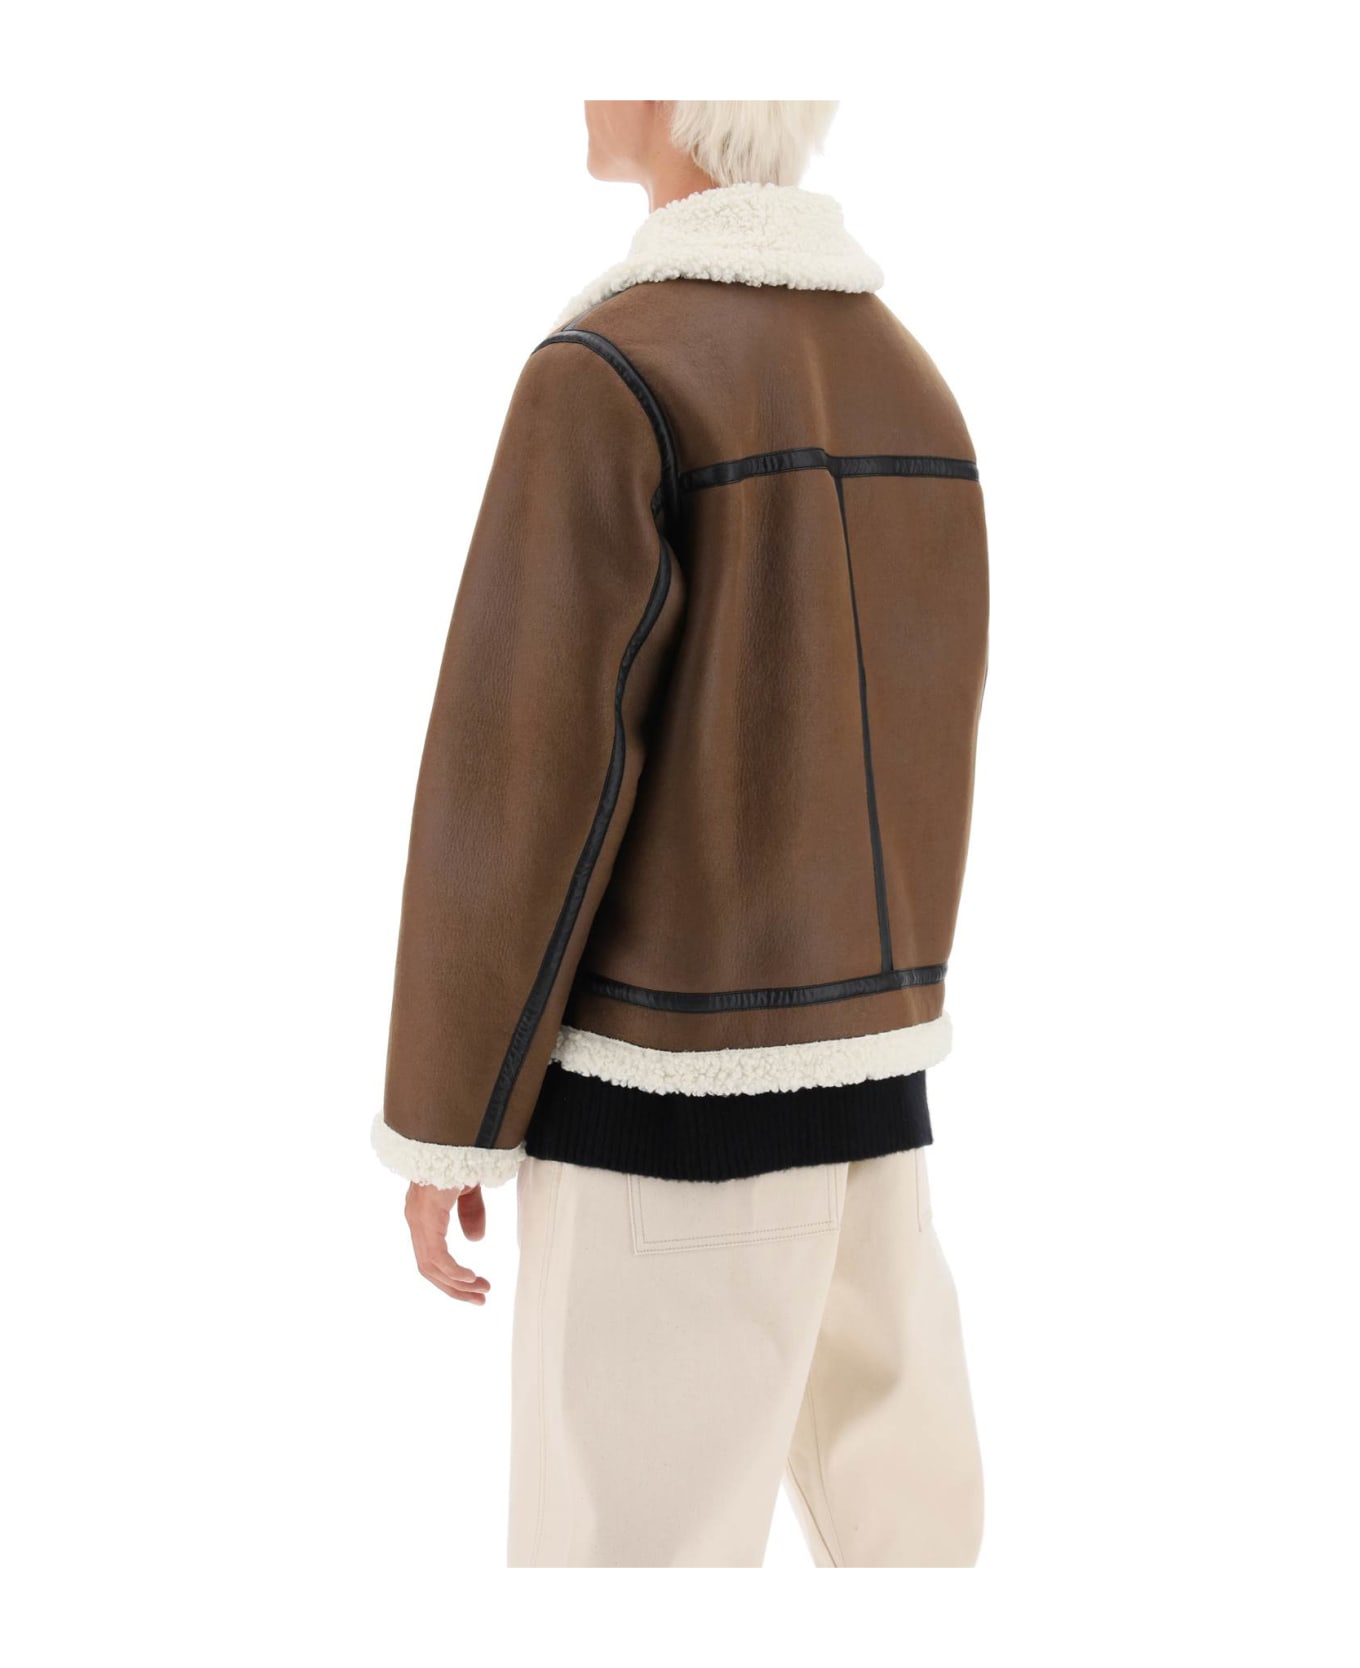 A.P.C. Eco-shearling Jacket - BROWN